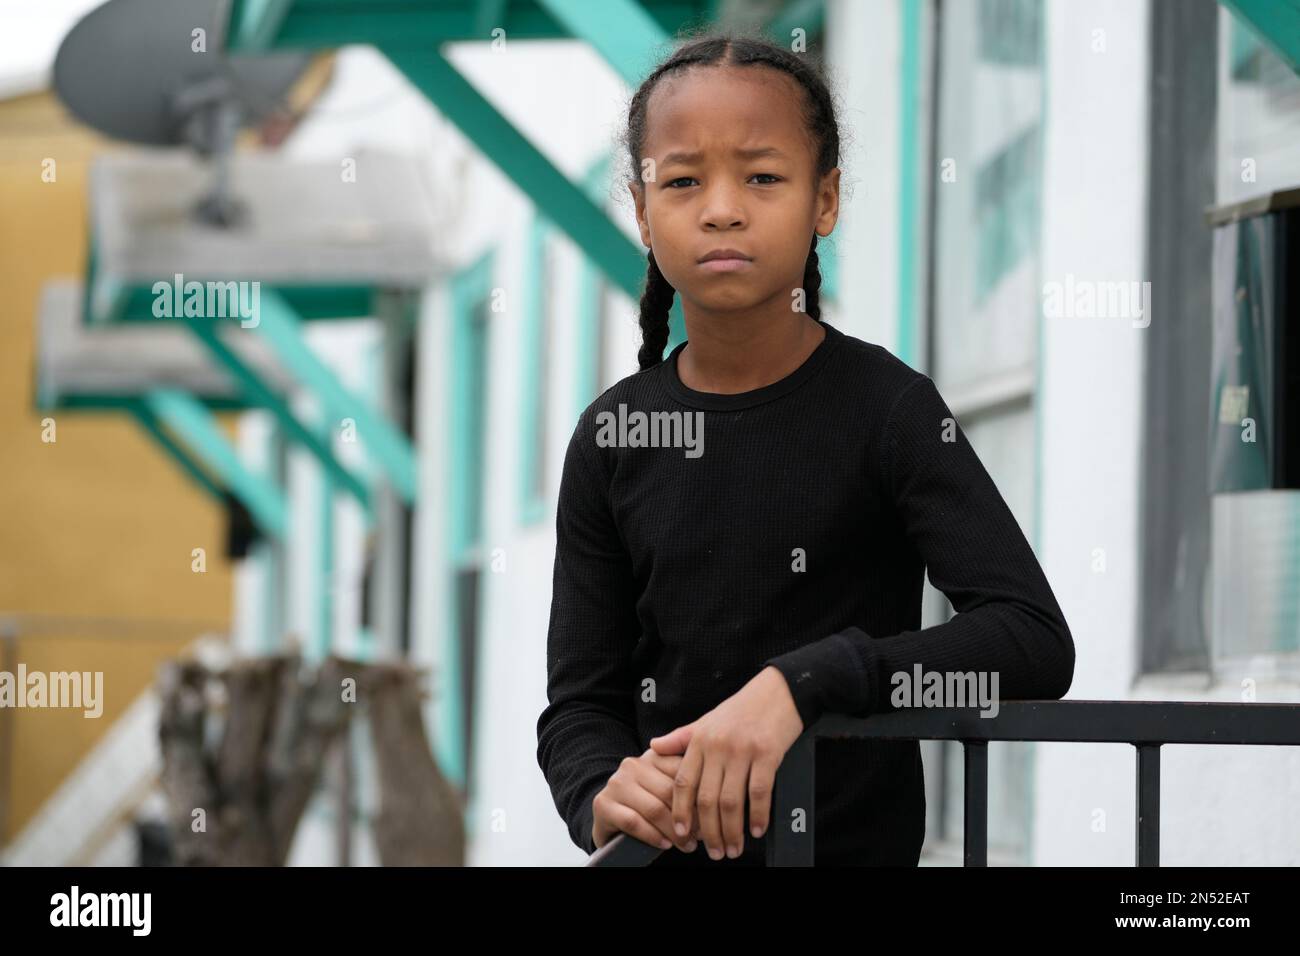 Ezekiel West, 10, stands for a portrait outside his home in Los